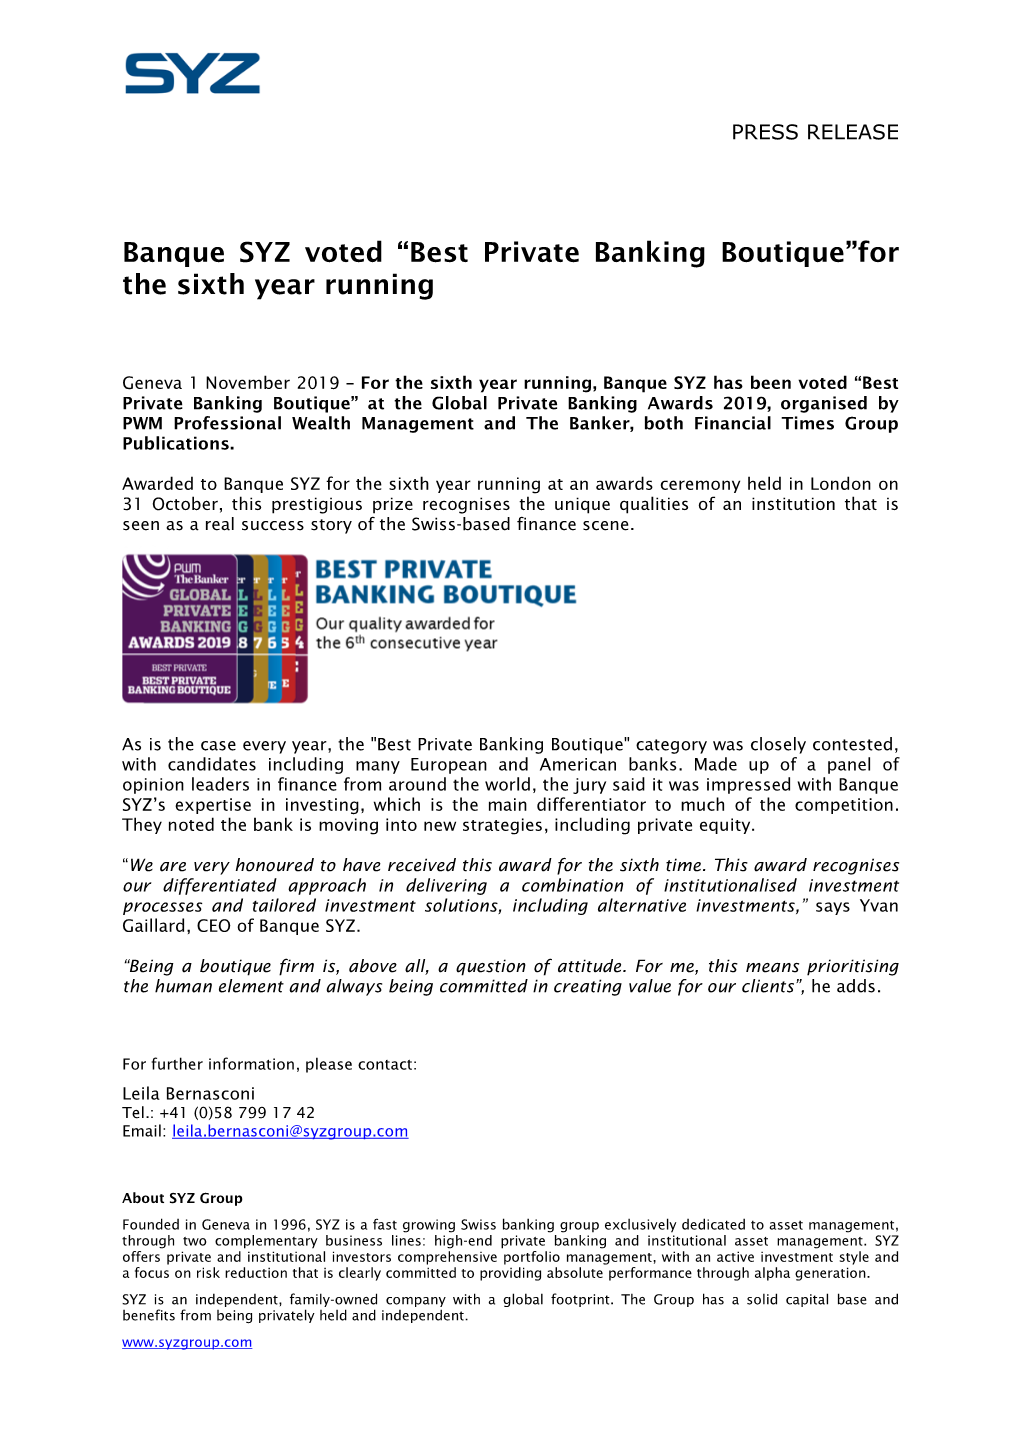 Banque SYZ Voted “Best Private Banking Boutique”For the Sixth Year Running